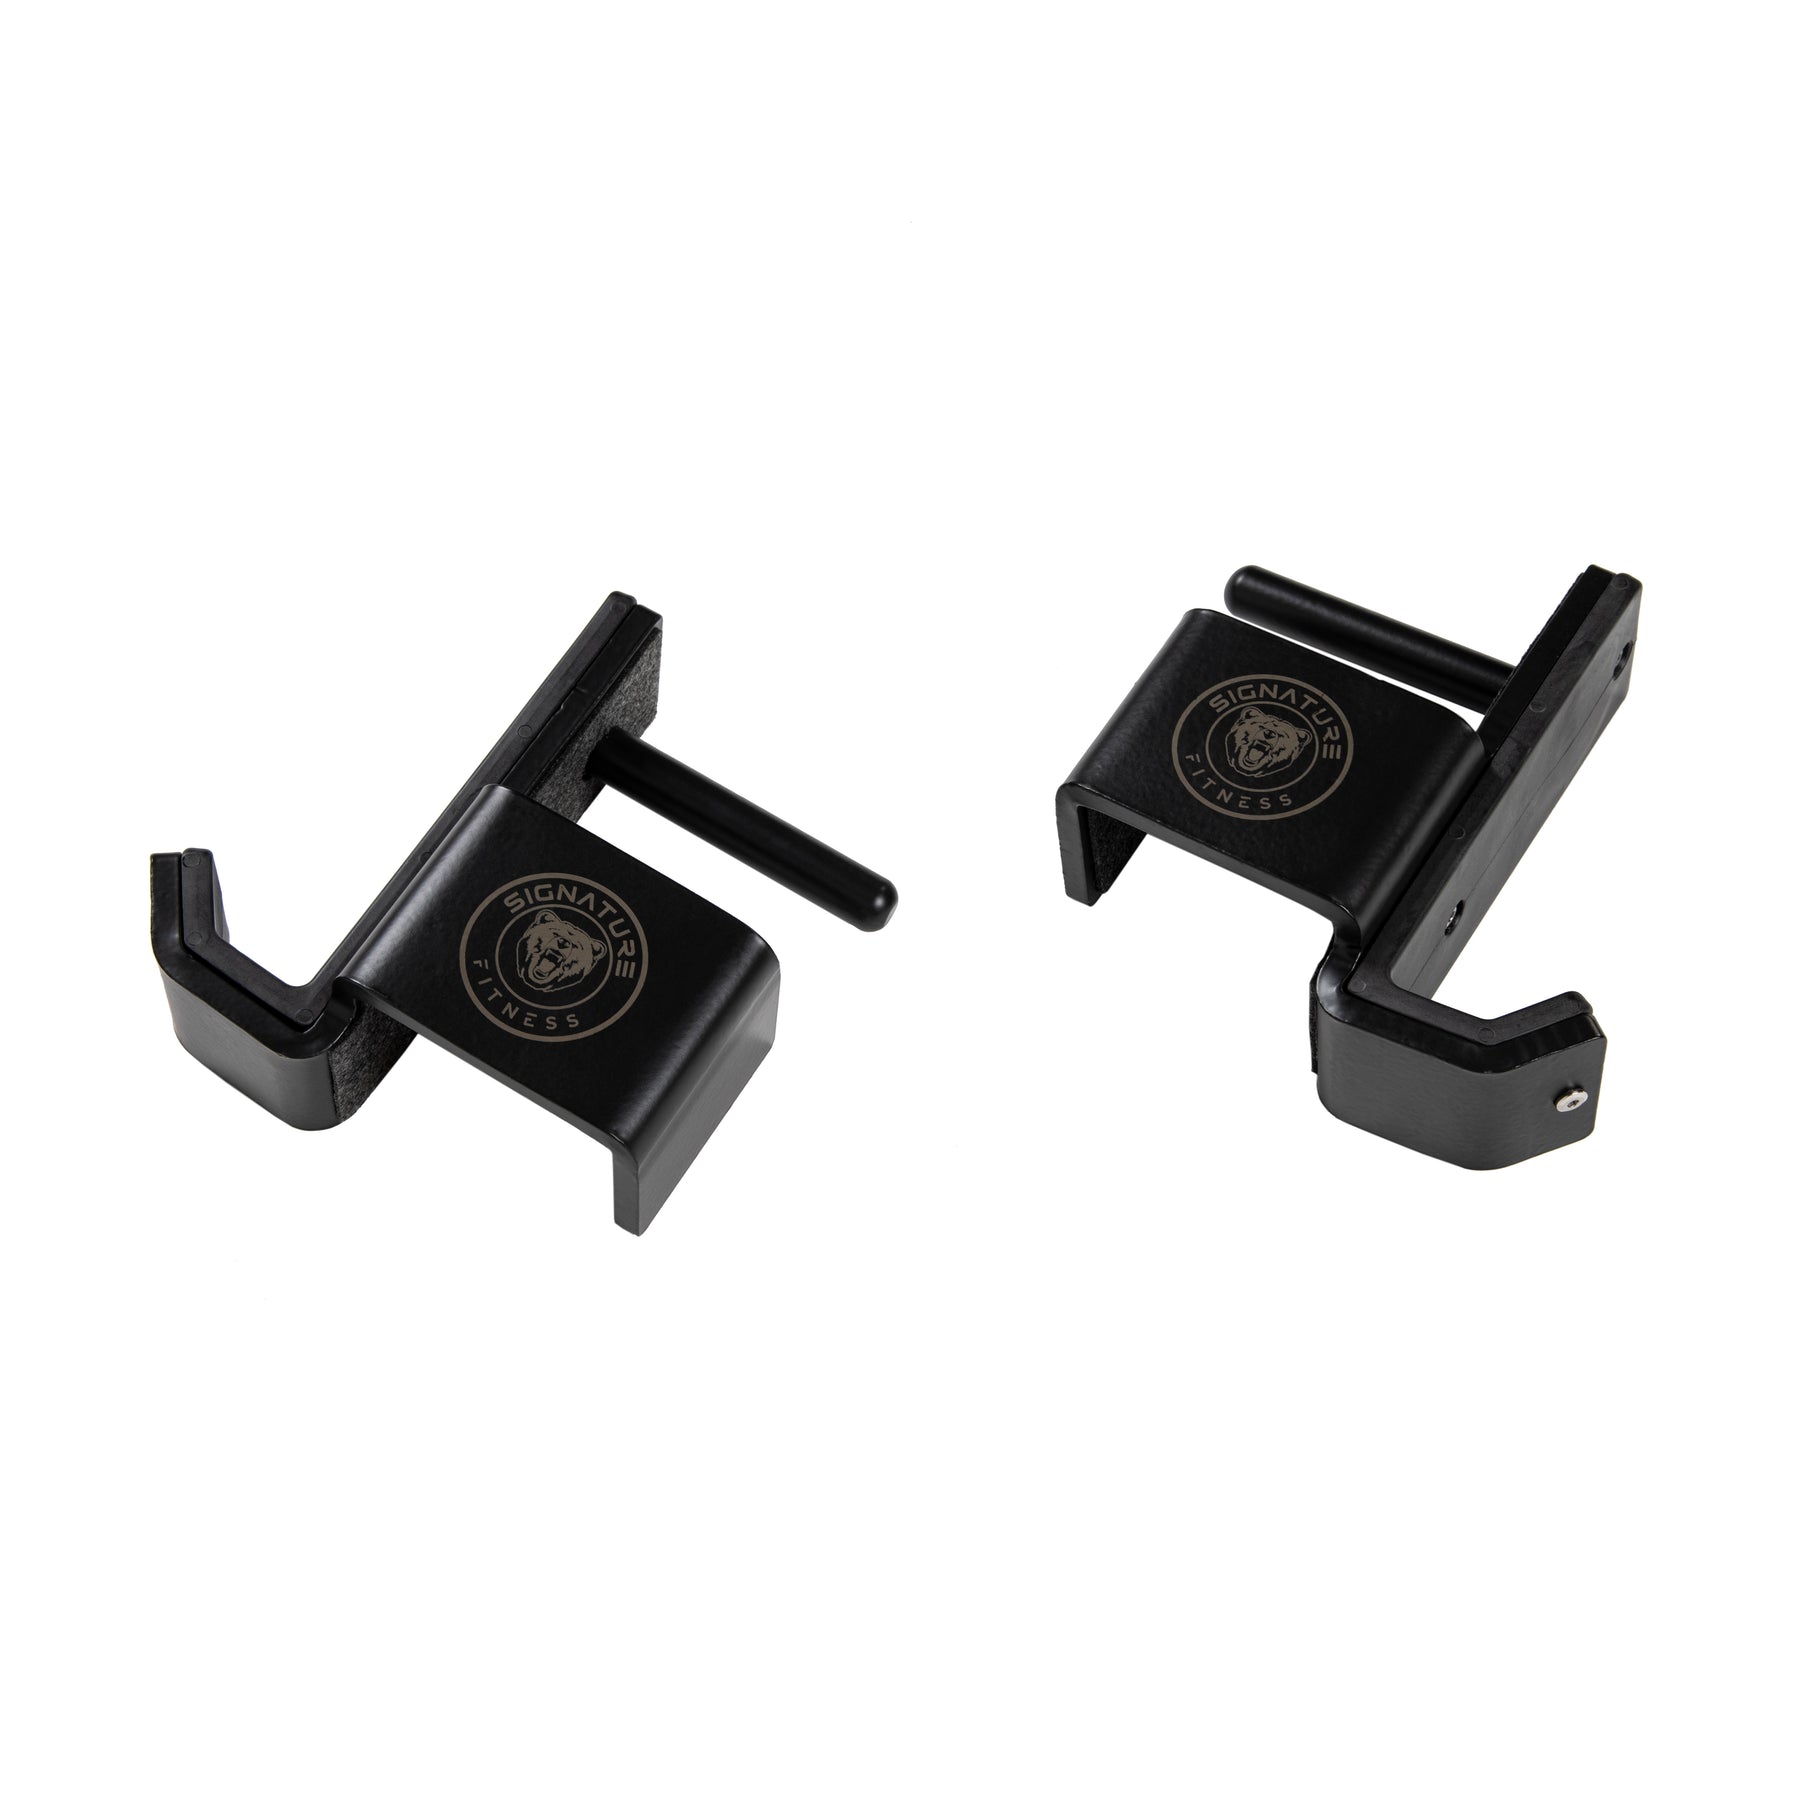 Signature Fitness J-Hooks with UHMW Plastic Coating to Protect Barbell